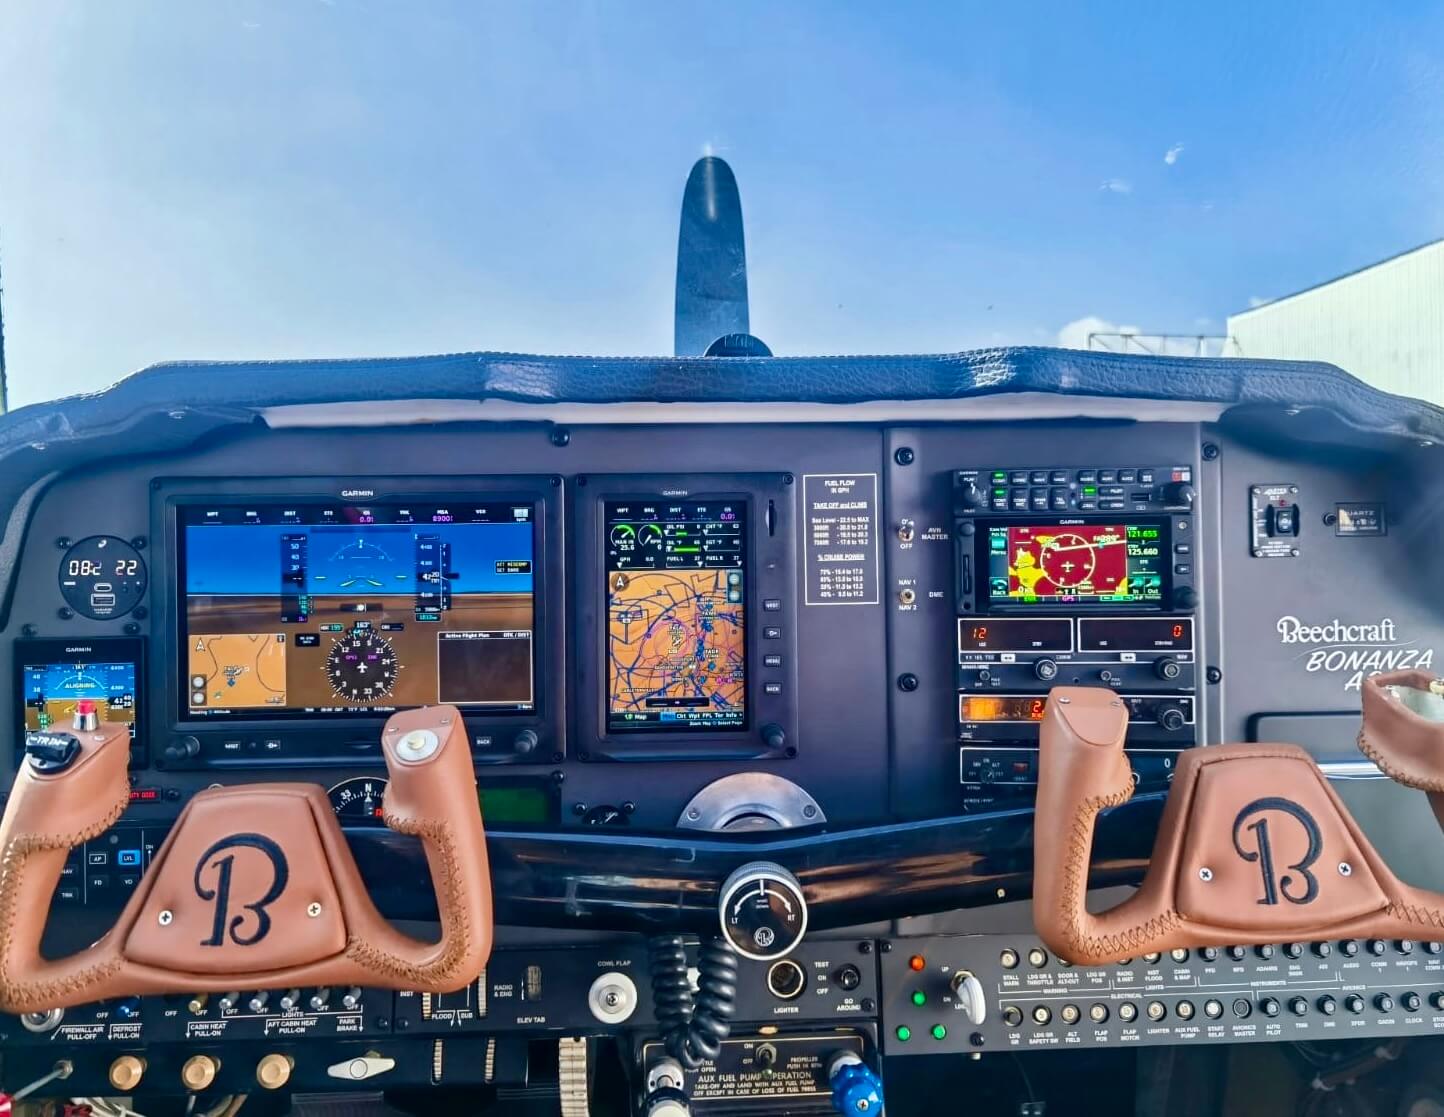 Install Garmin G3X Touch Certified with Engine Indication, G5 Standby, GMA 345 Audio Panel, GTN650Xi, GFC 500 Autopilot, Artex 345 ELT and Mid Continent Digital Clock.